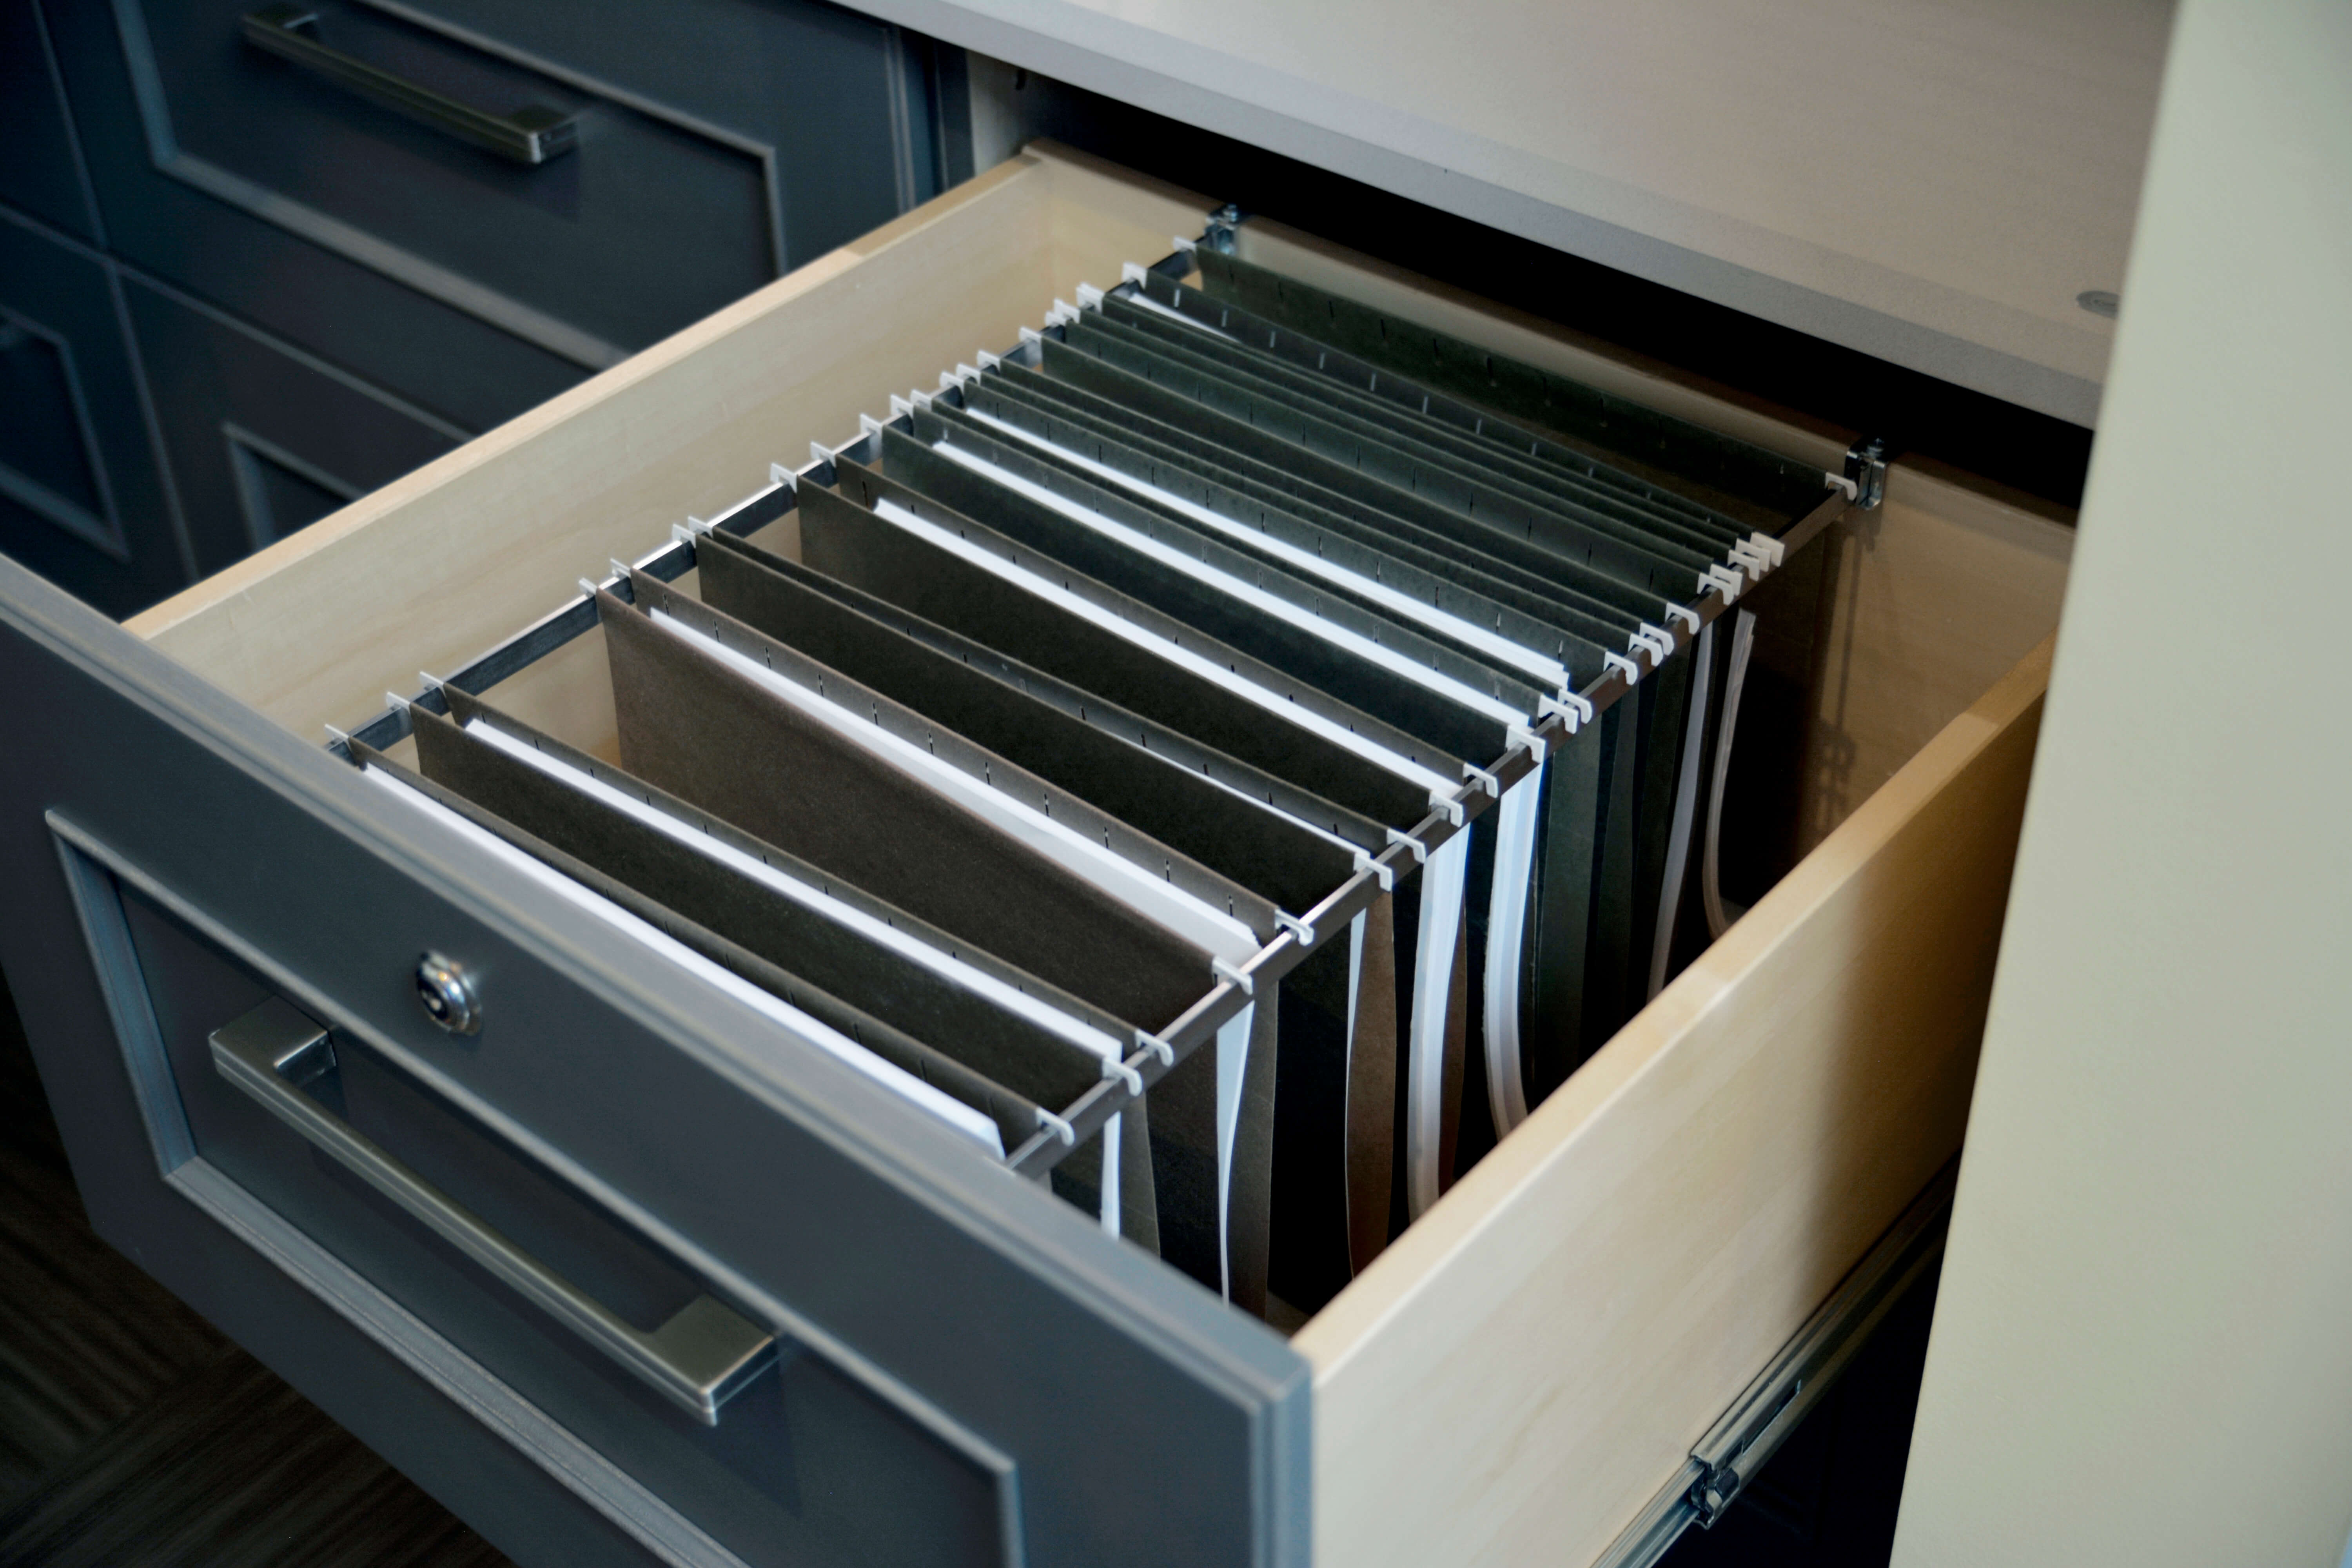 Home Office Cabinetry and Built-in Desk with File cabinet drawer storage. Lateral Standard Drawer by Dura Supreme Cabinetry